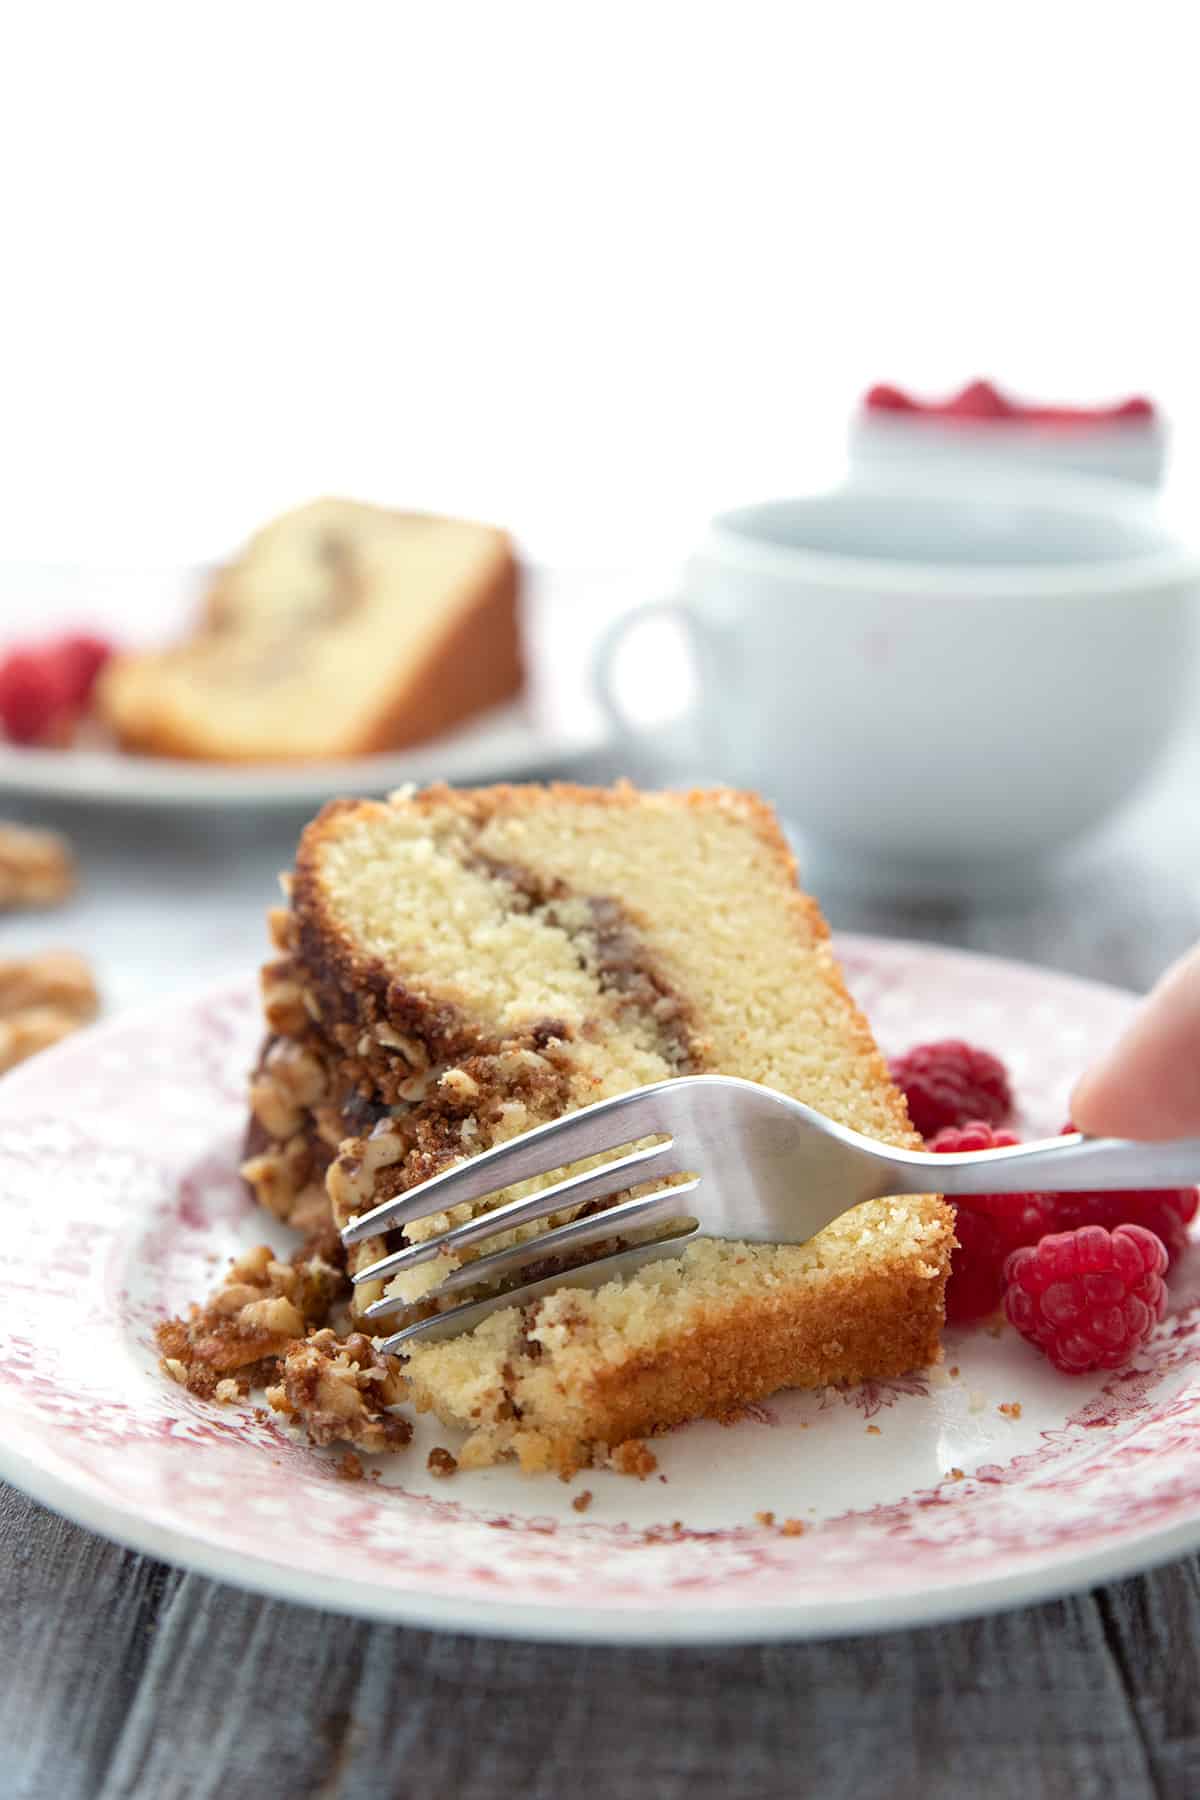 A fork digging into a slice of keto coffee cake on a red patterned plate, with raspberries on the side.